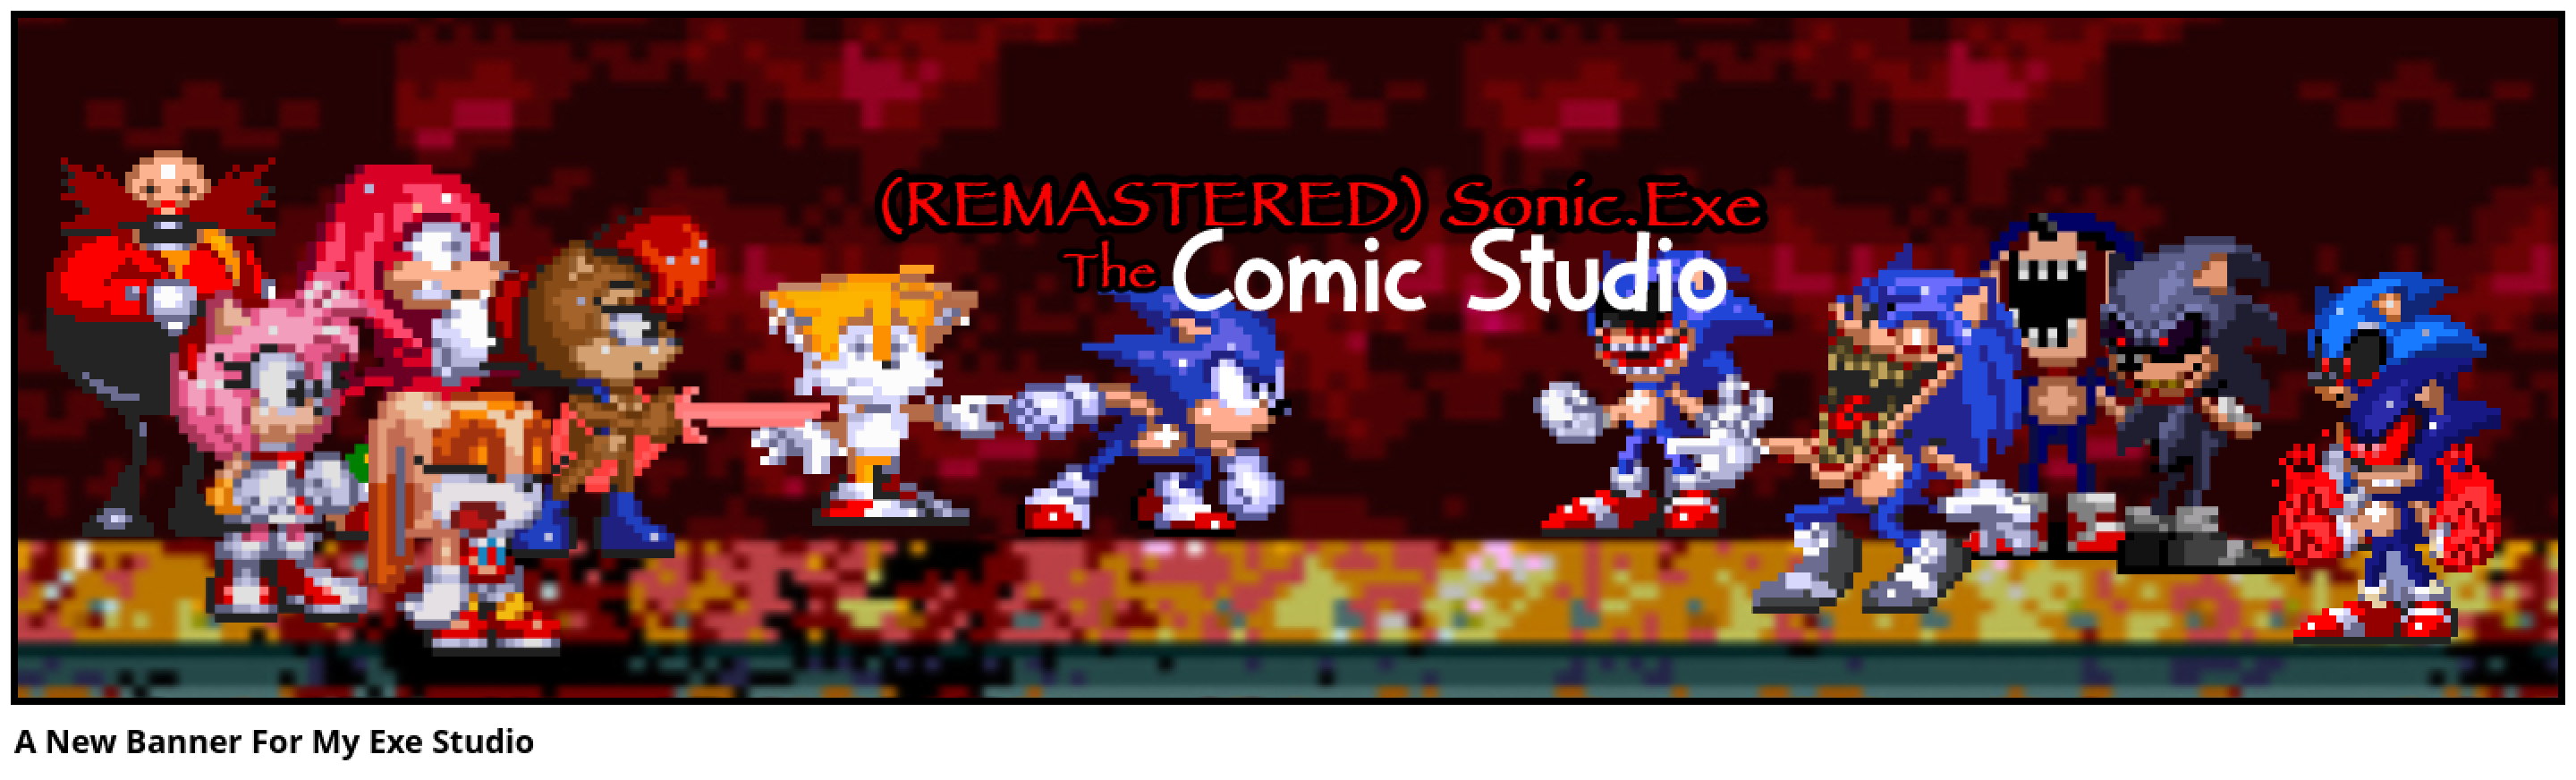 A New Banner For My Exe Studio